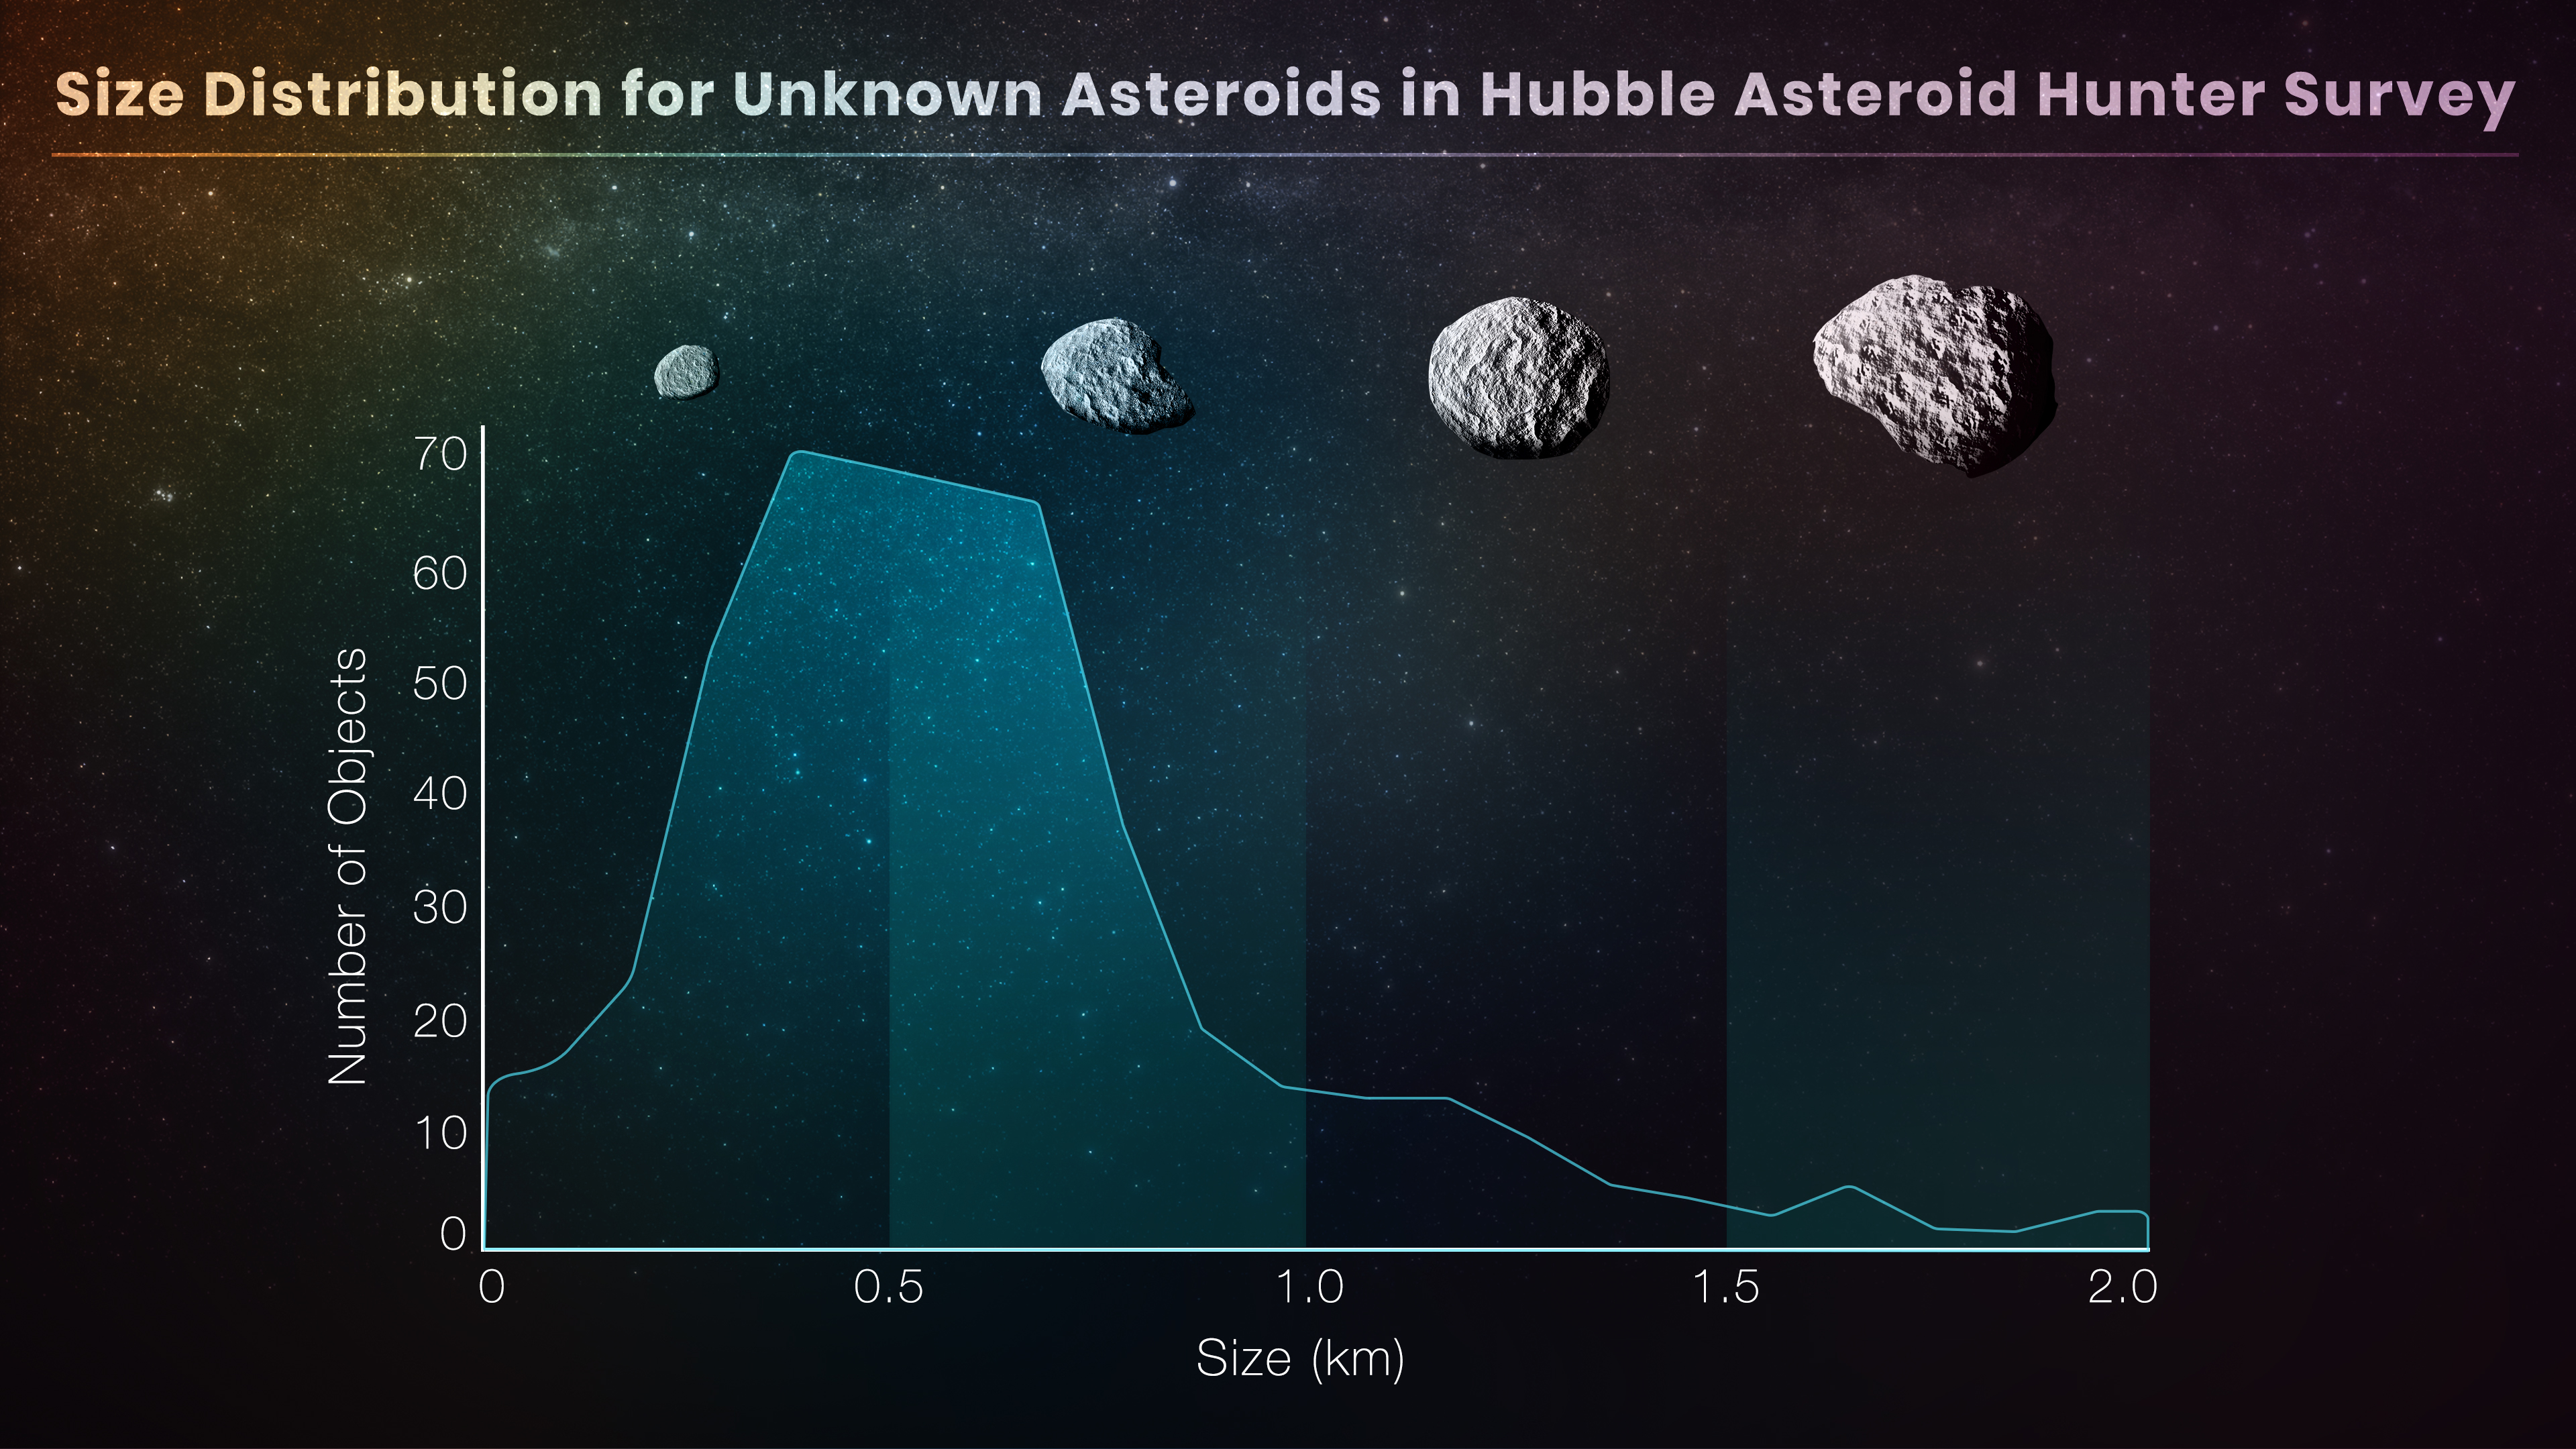 This graph plots the size of asteroids versus their abundance, based on a Hubble Space Telescope archival survey that found 1,701 mostly previously undetected asteroids lying between the orbits of Mars and Jupiter. The vertical axis lists number of objects from zero to 70. The horizontal axis lists size, from zero kilometers on the left, to 2 kilometers on the right. The graph slopes up such that the most abundant asteroids detected by Hubble in the survey are 0.5 kilometers across in size.